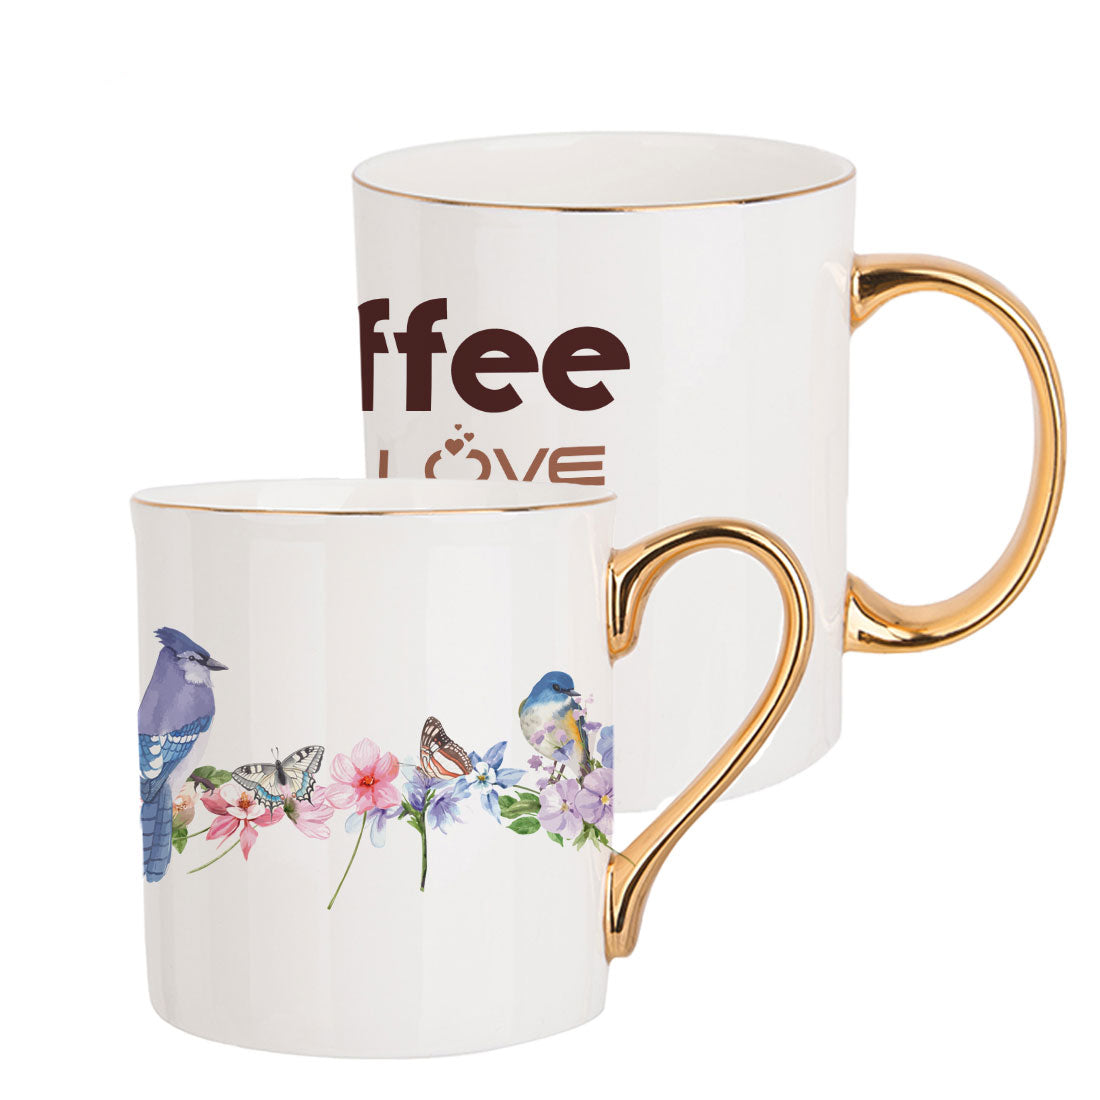 Pearl Coating™ Sublimation 10oz Bone China White Mug with Gold Rim and Handle - Pack of 6 - Joto Imaging Supplies Canada